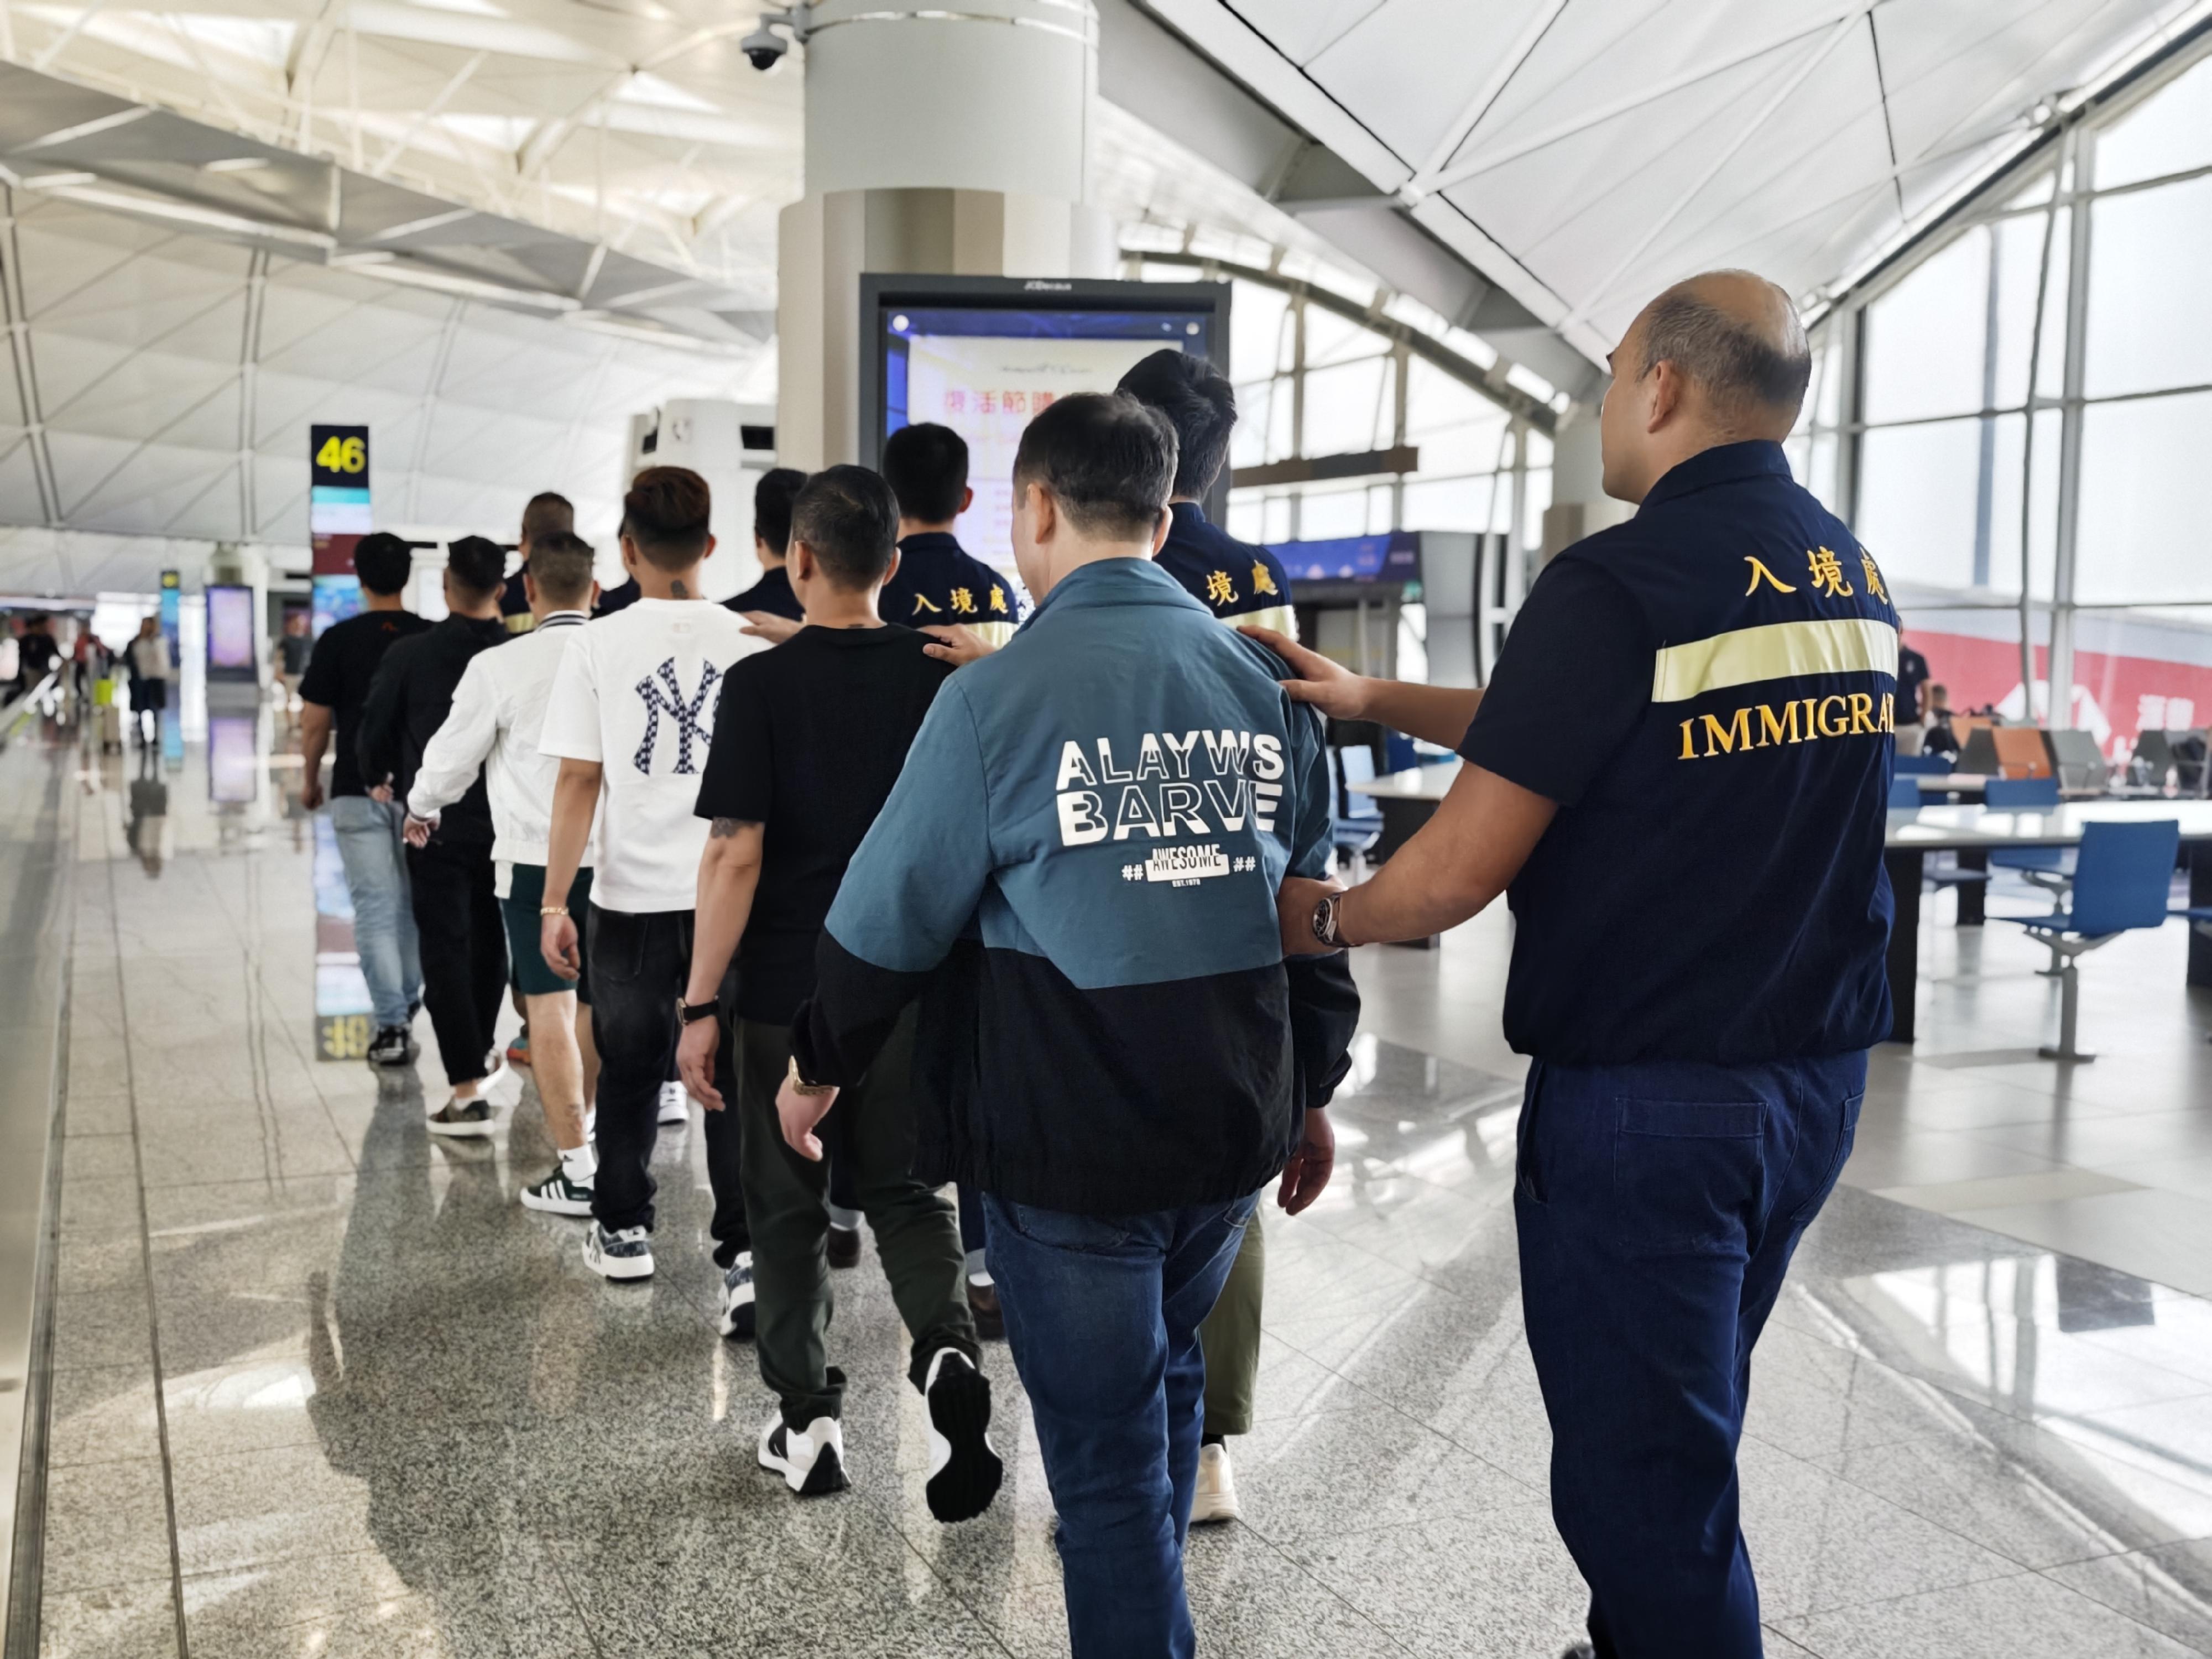 The Immigration Department (ImmD) carried out a repatriation operation today (March 26). A total of 27 Vietnamese illegal immigrants were repatriated to Vietnam. Photo shows the illegal immigrants being escorted by ImmD officers to depart from Hong Kong.